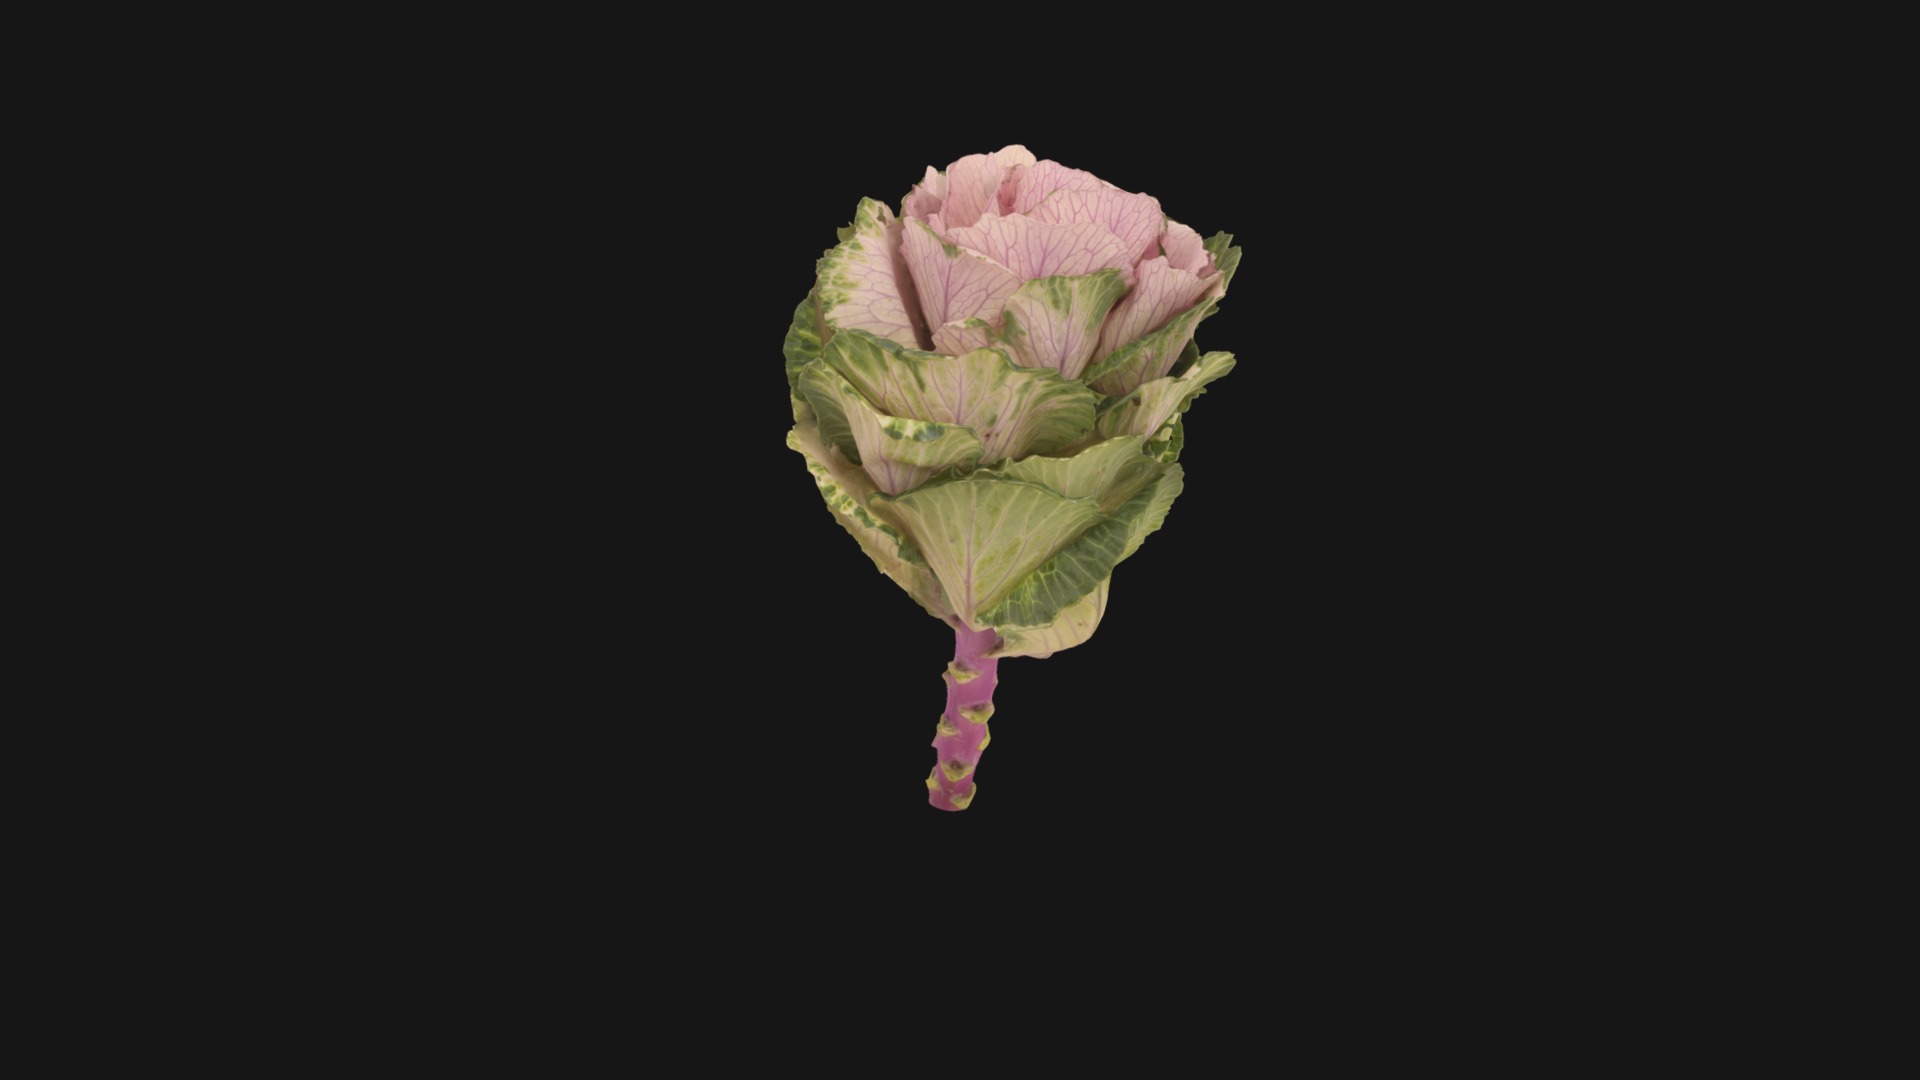 3D model Fw18 – Pink Green Flower - This is a 3D model of the Fw18 - Pink Green Flower. The 3D model is about a bouquet of flowers.